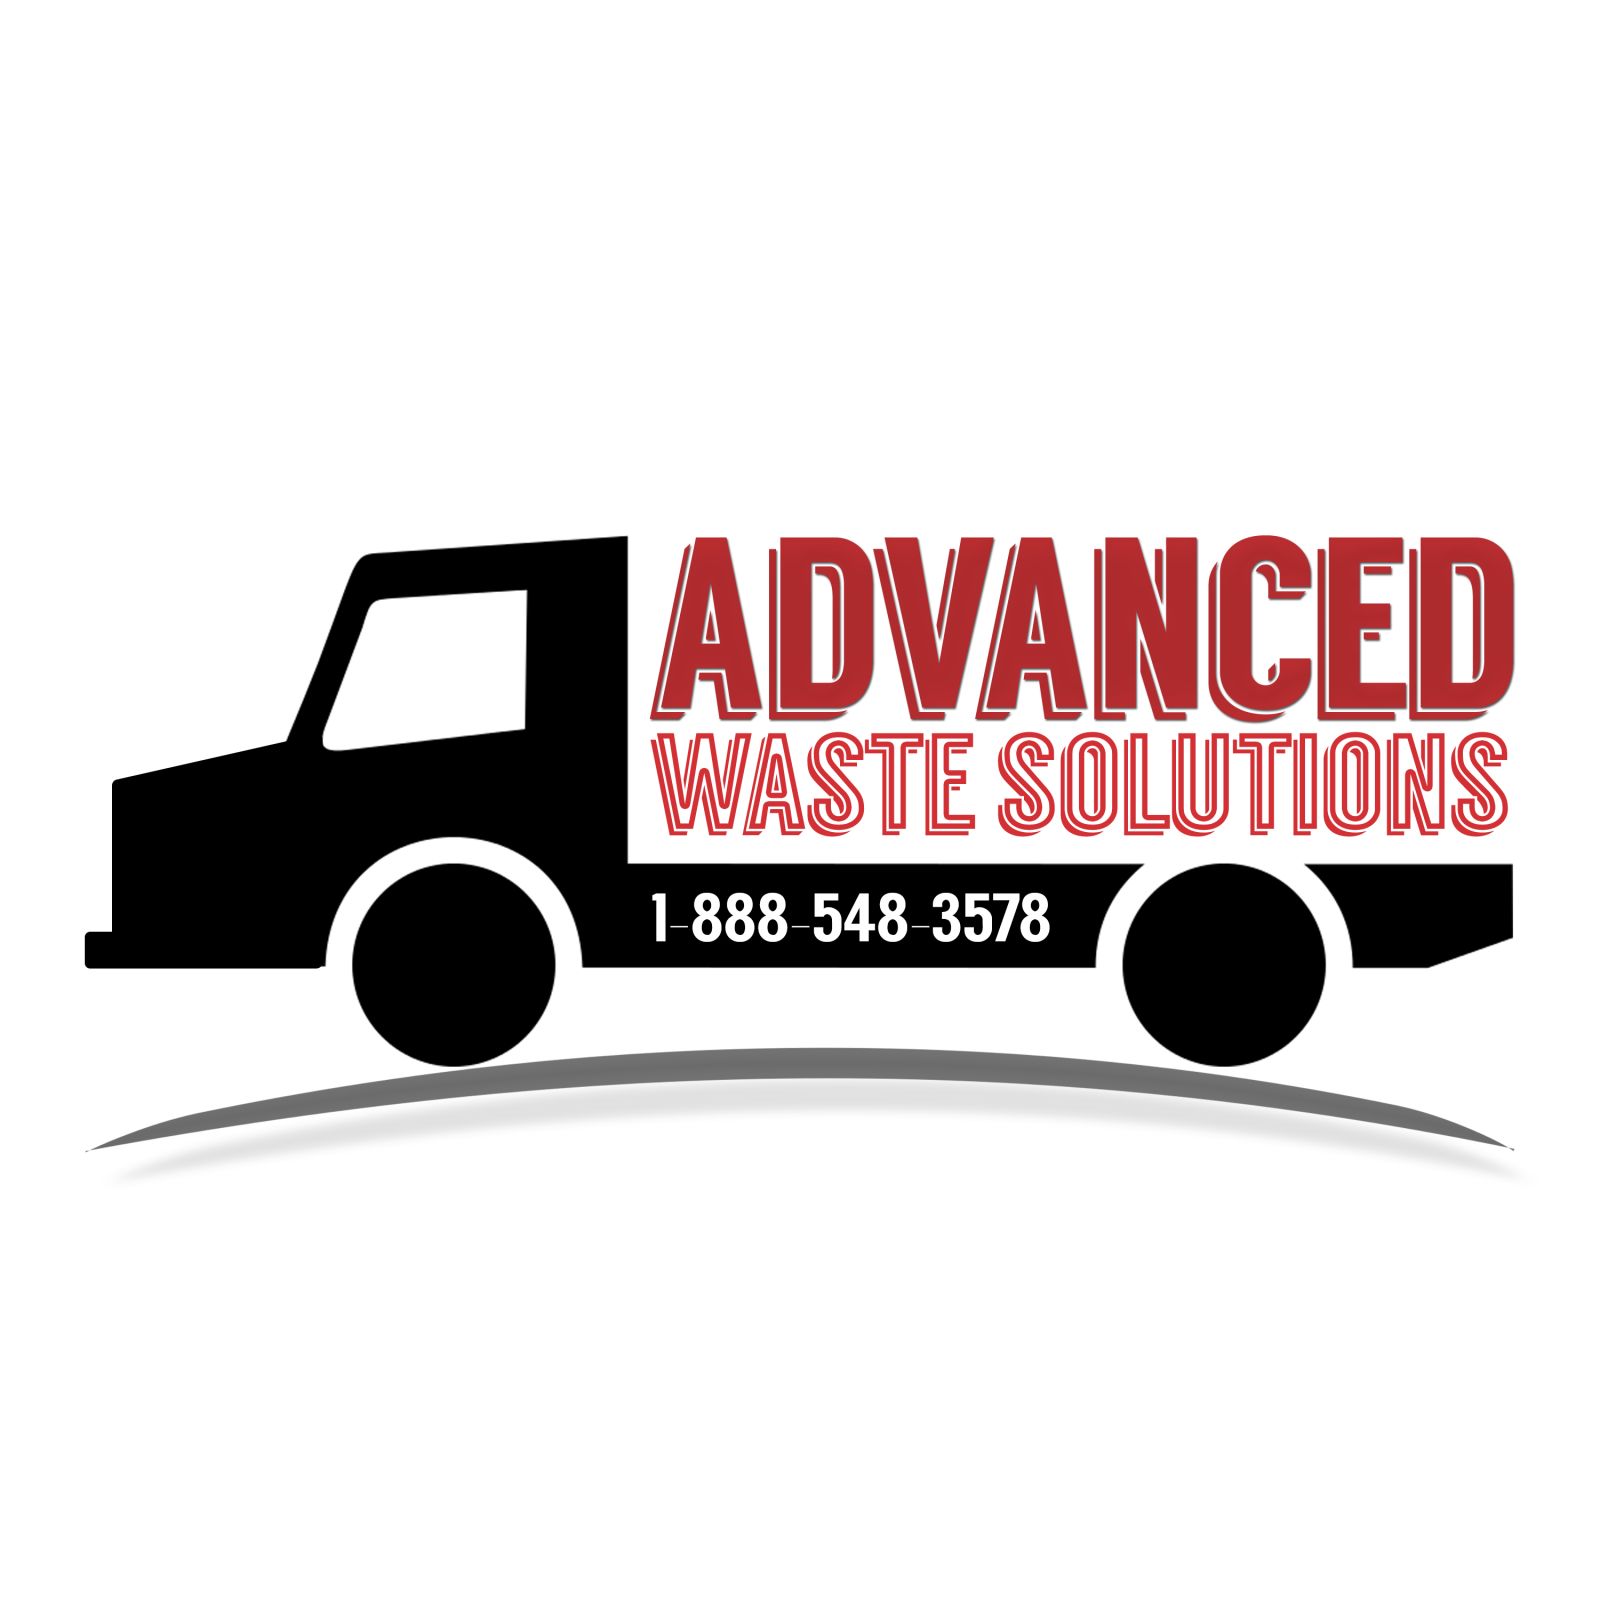 Advanced Waste Solutions's Image